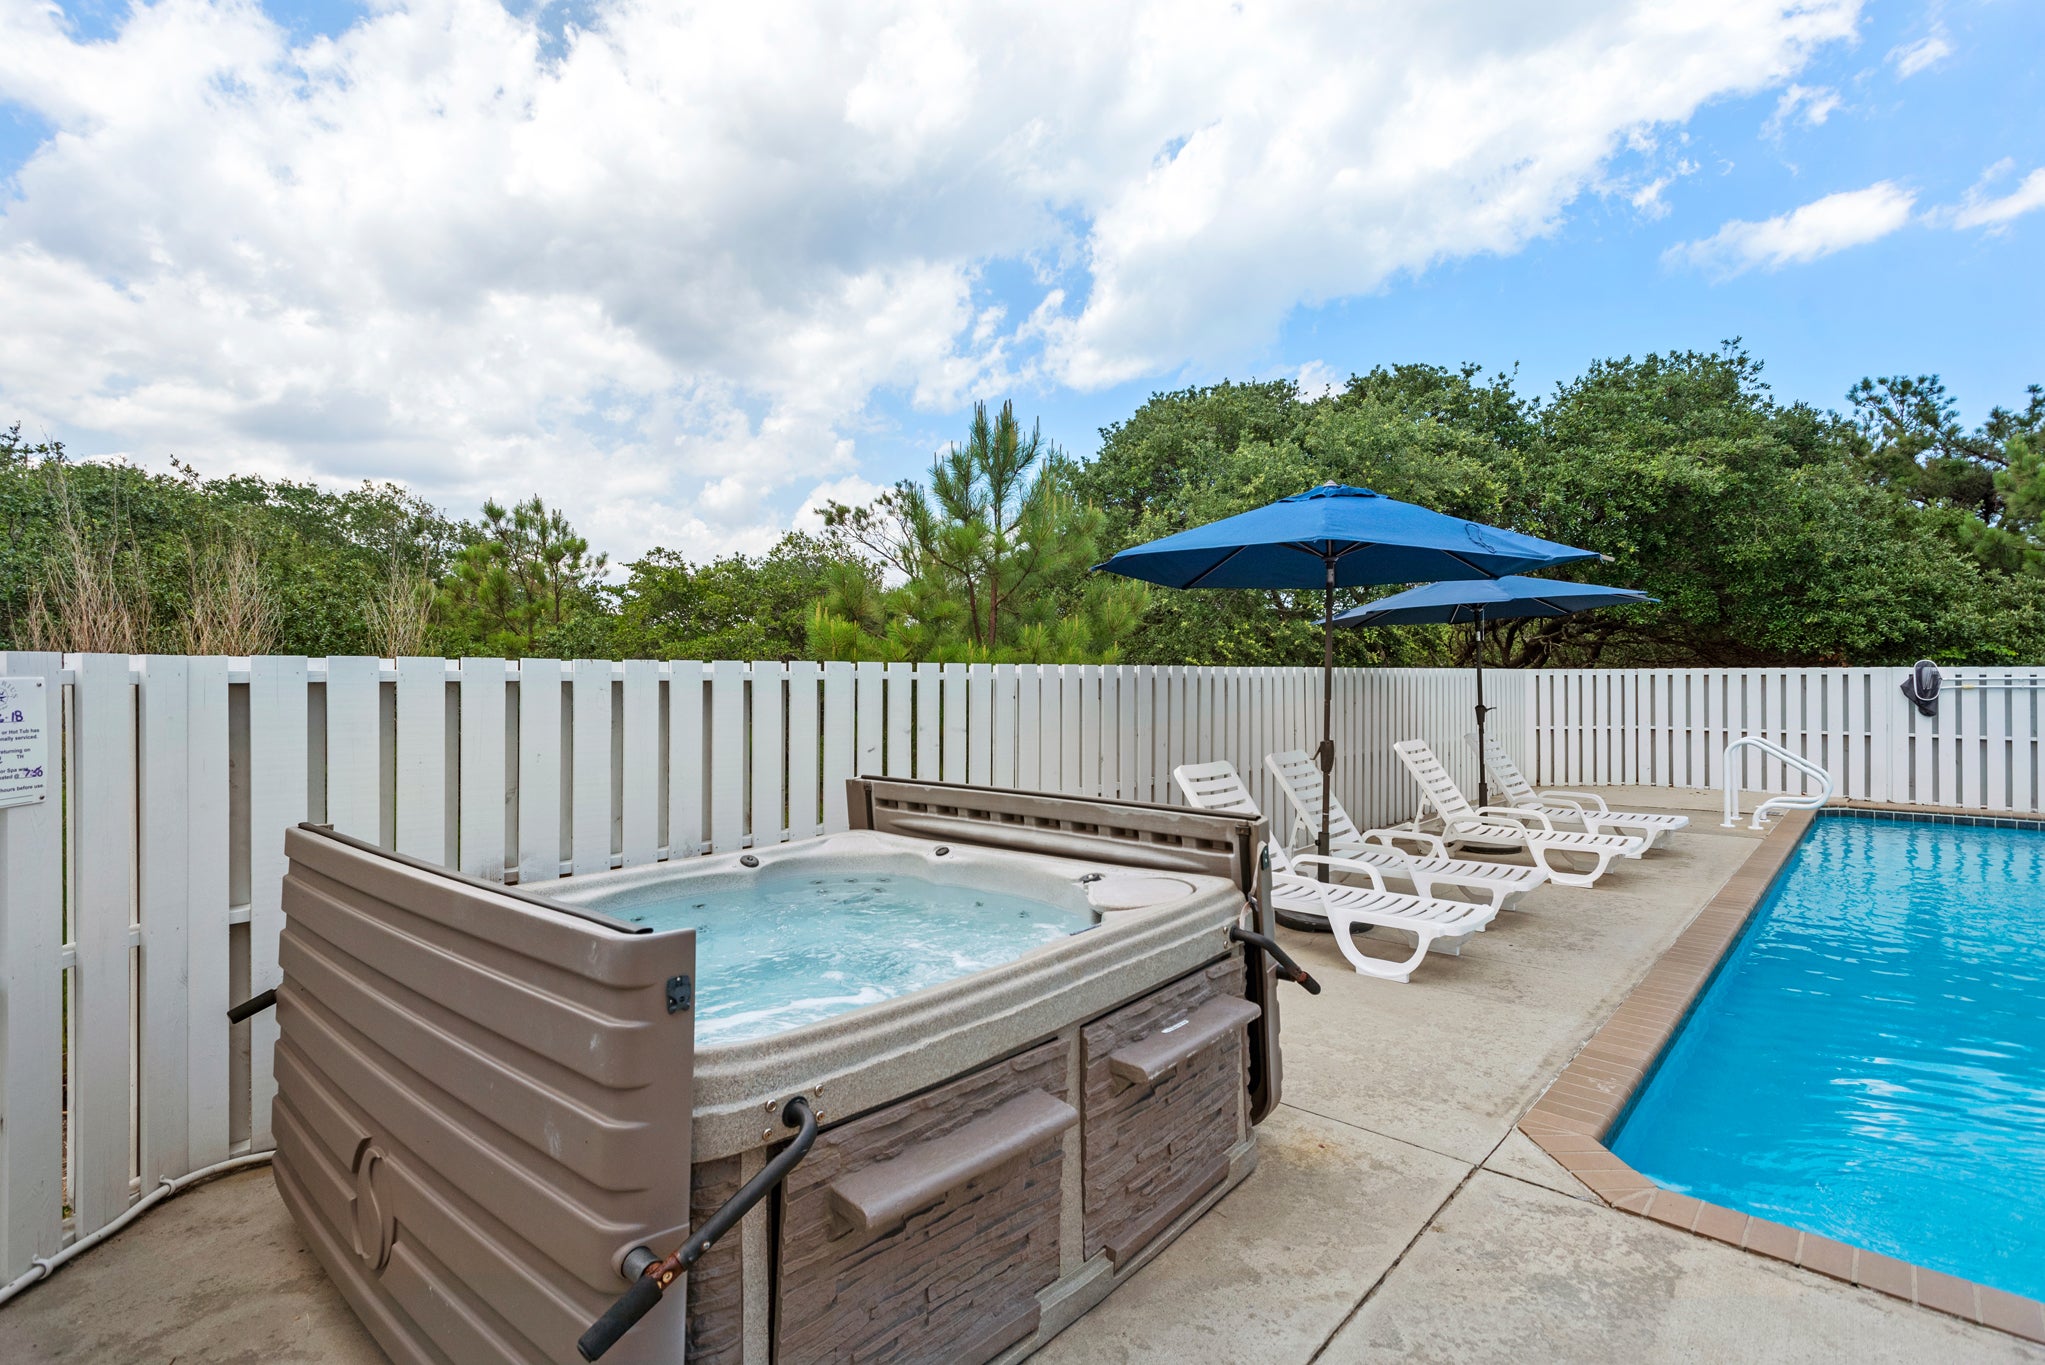 PI07: Island Breeze | Pool Area w/ Hot Tub - Umbrellas Not Available For Guest Use